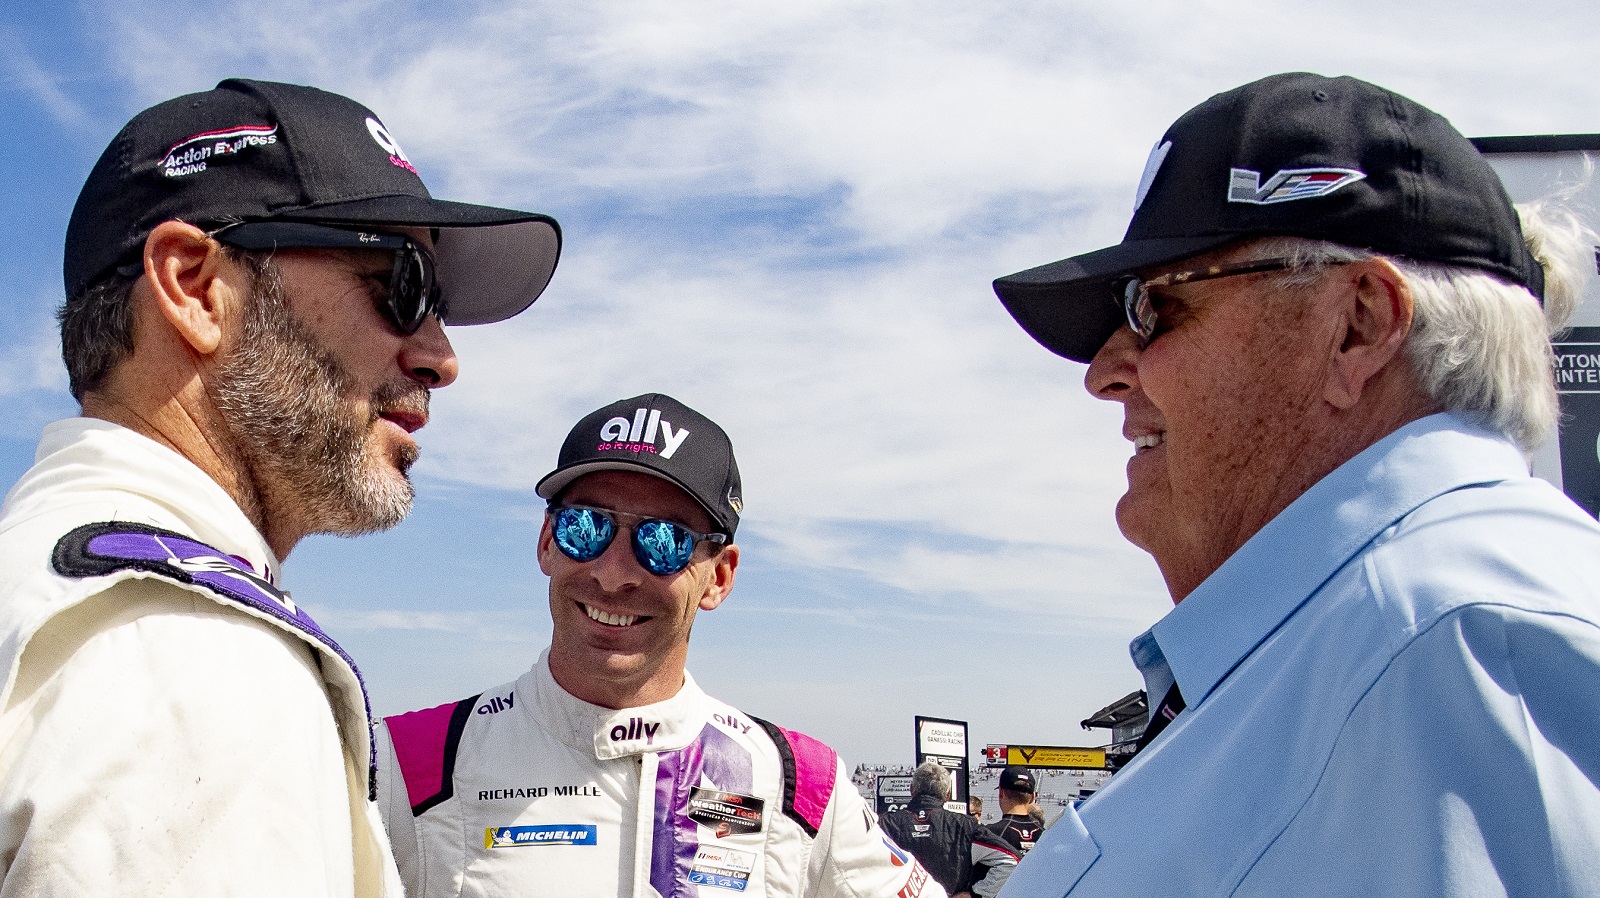 Jimmie Johnson, left, talks with Rick Hendrick, right, and Simon Pagenaud in the pits before the Sahlens Six Hours at the Glen IMSA race on June 27, 2021.